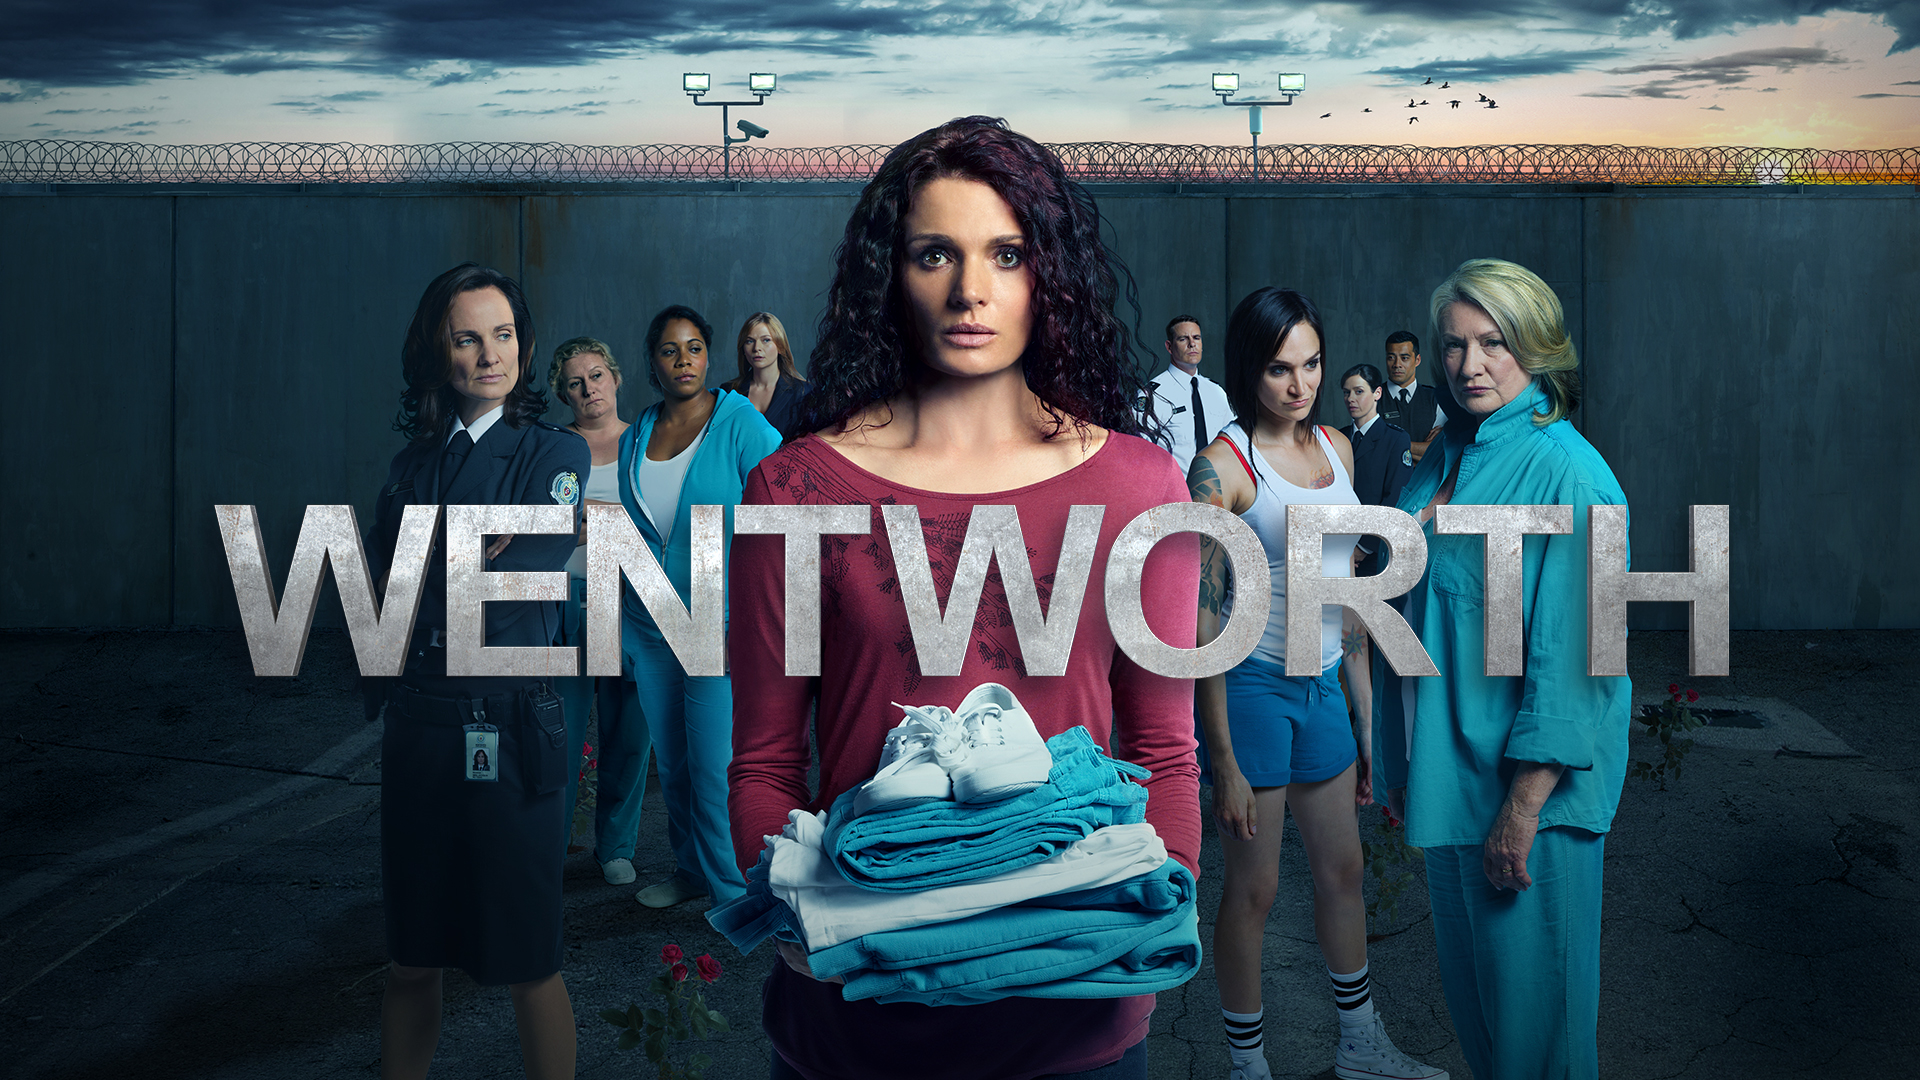 When Does Wentworth Come On Netflix